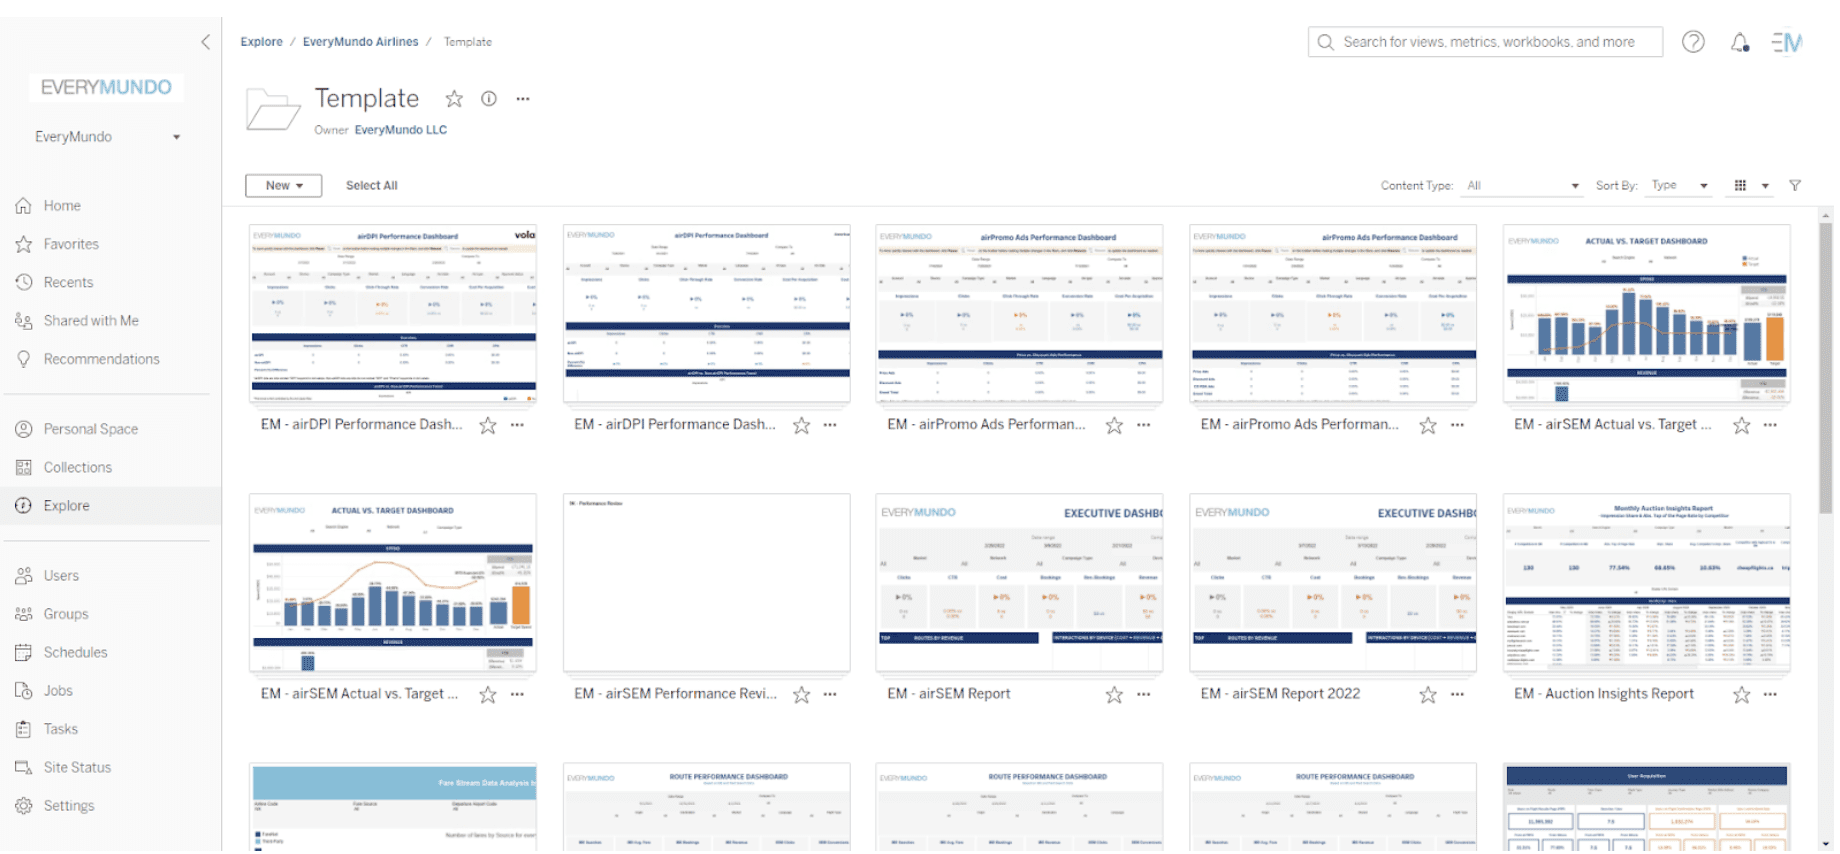 Best Practices to Roll Out Tableau Dashboards Across Customers